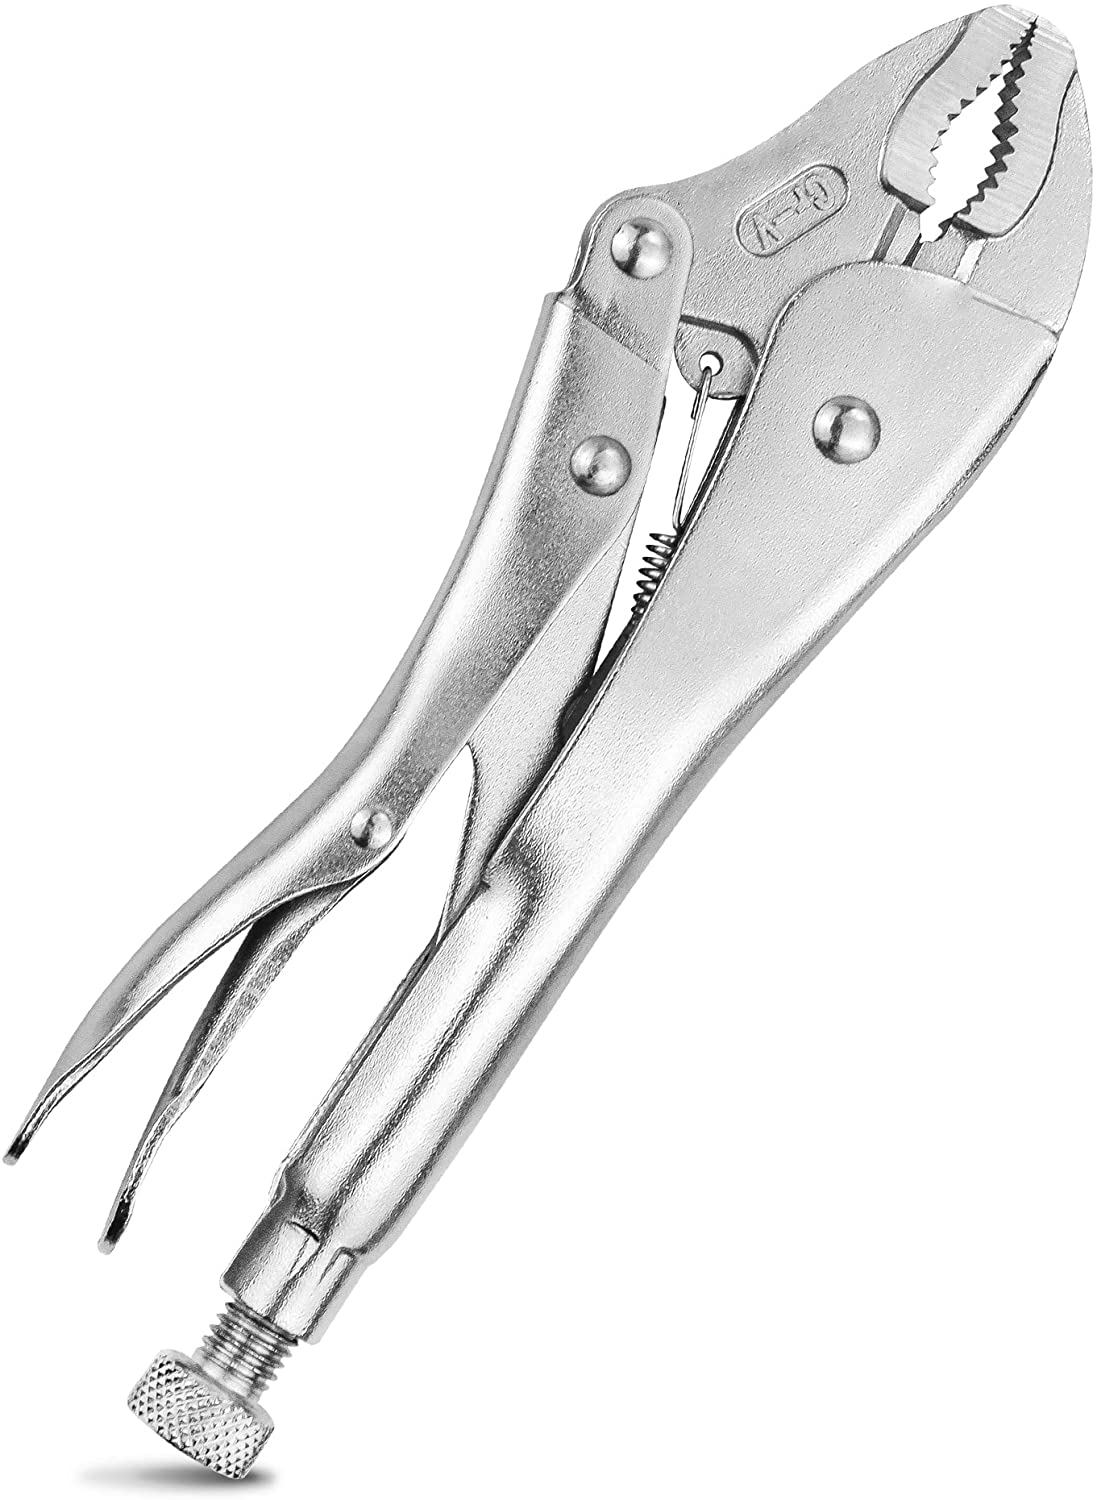 10 Inch Locking Plier Curved Jaw with Wire Cutter